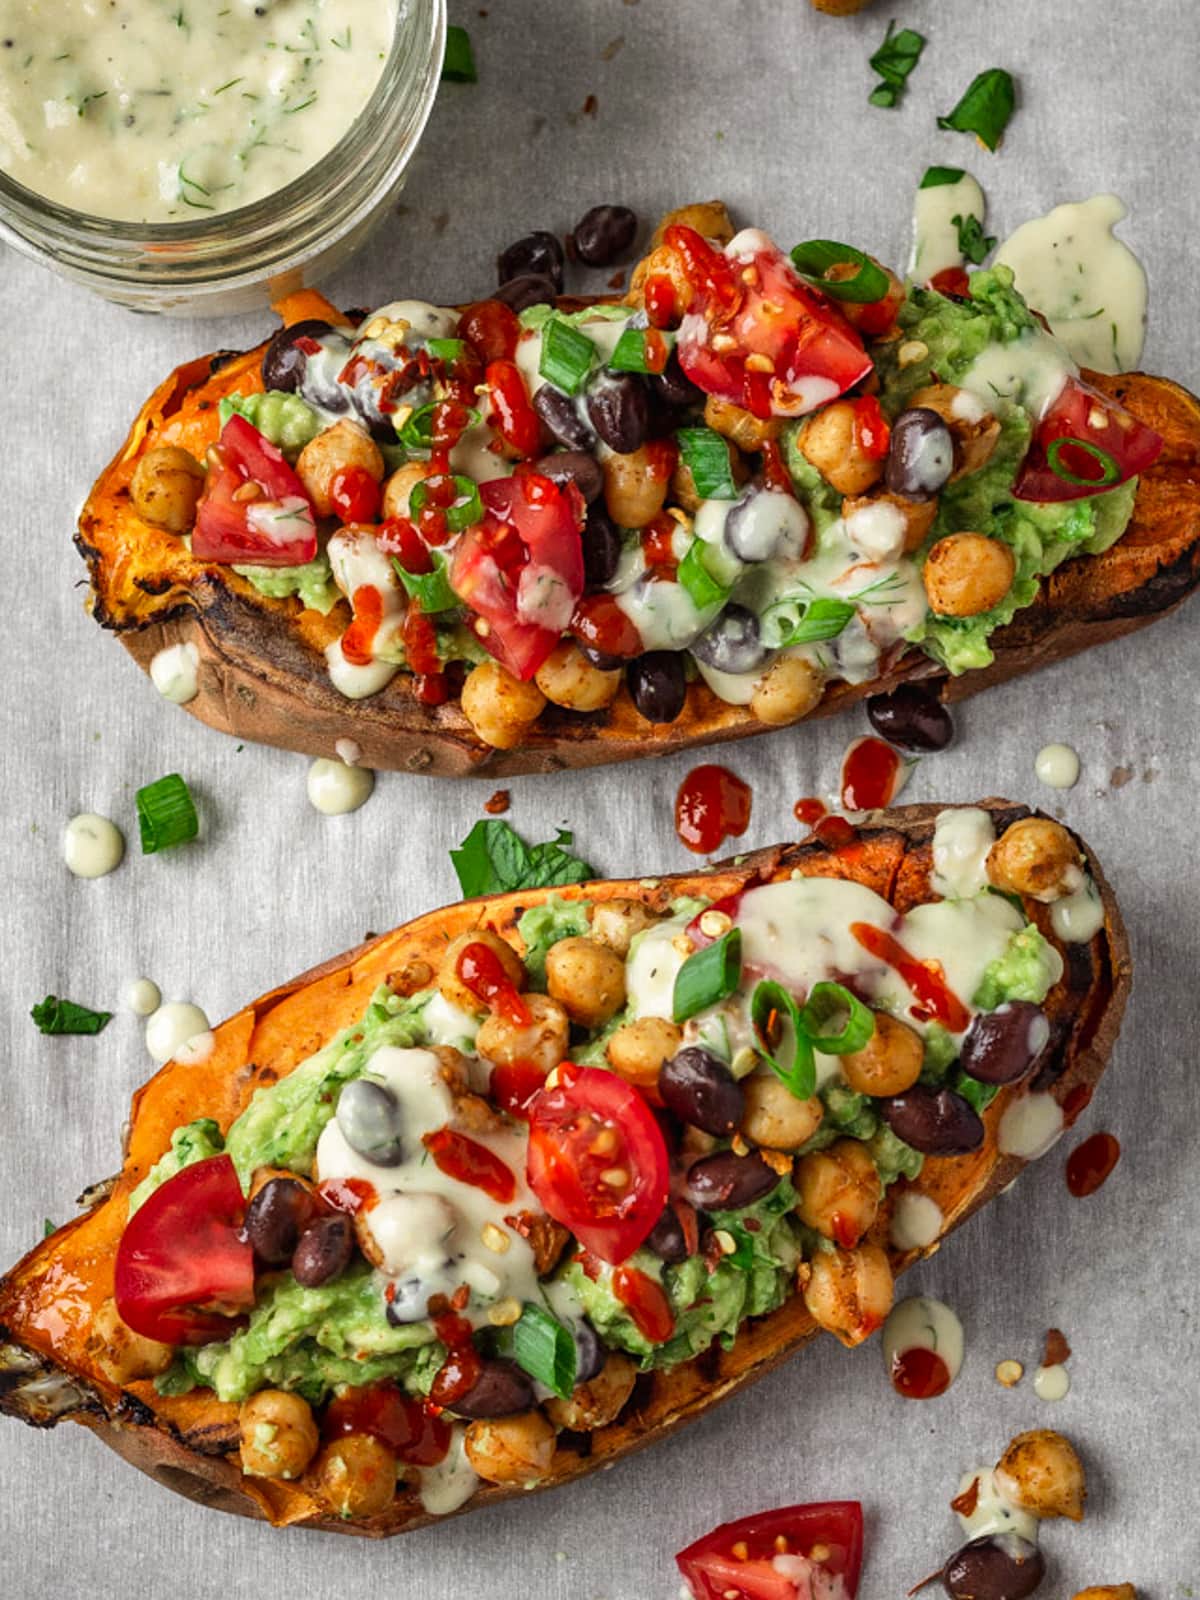 Two halves of sweet potatoes topped with chickpeas, black beans, avocado and sauce.